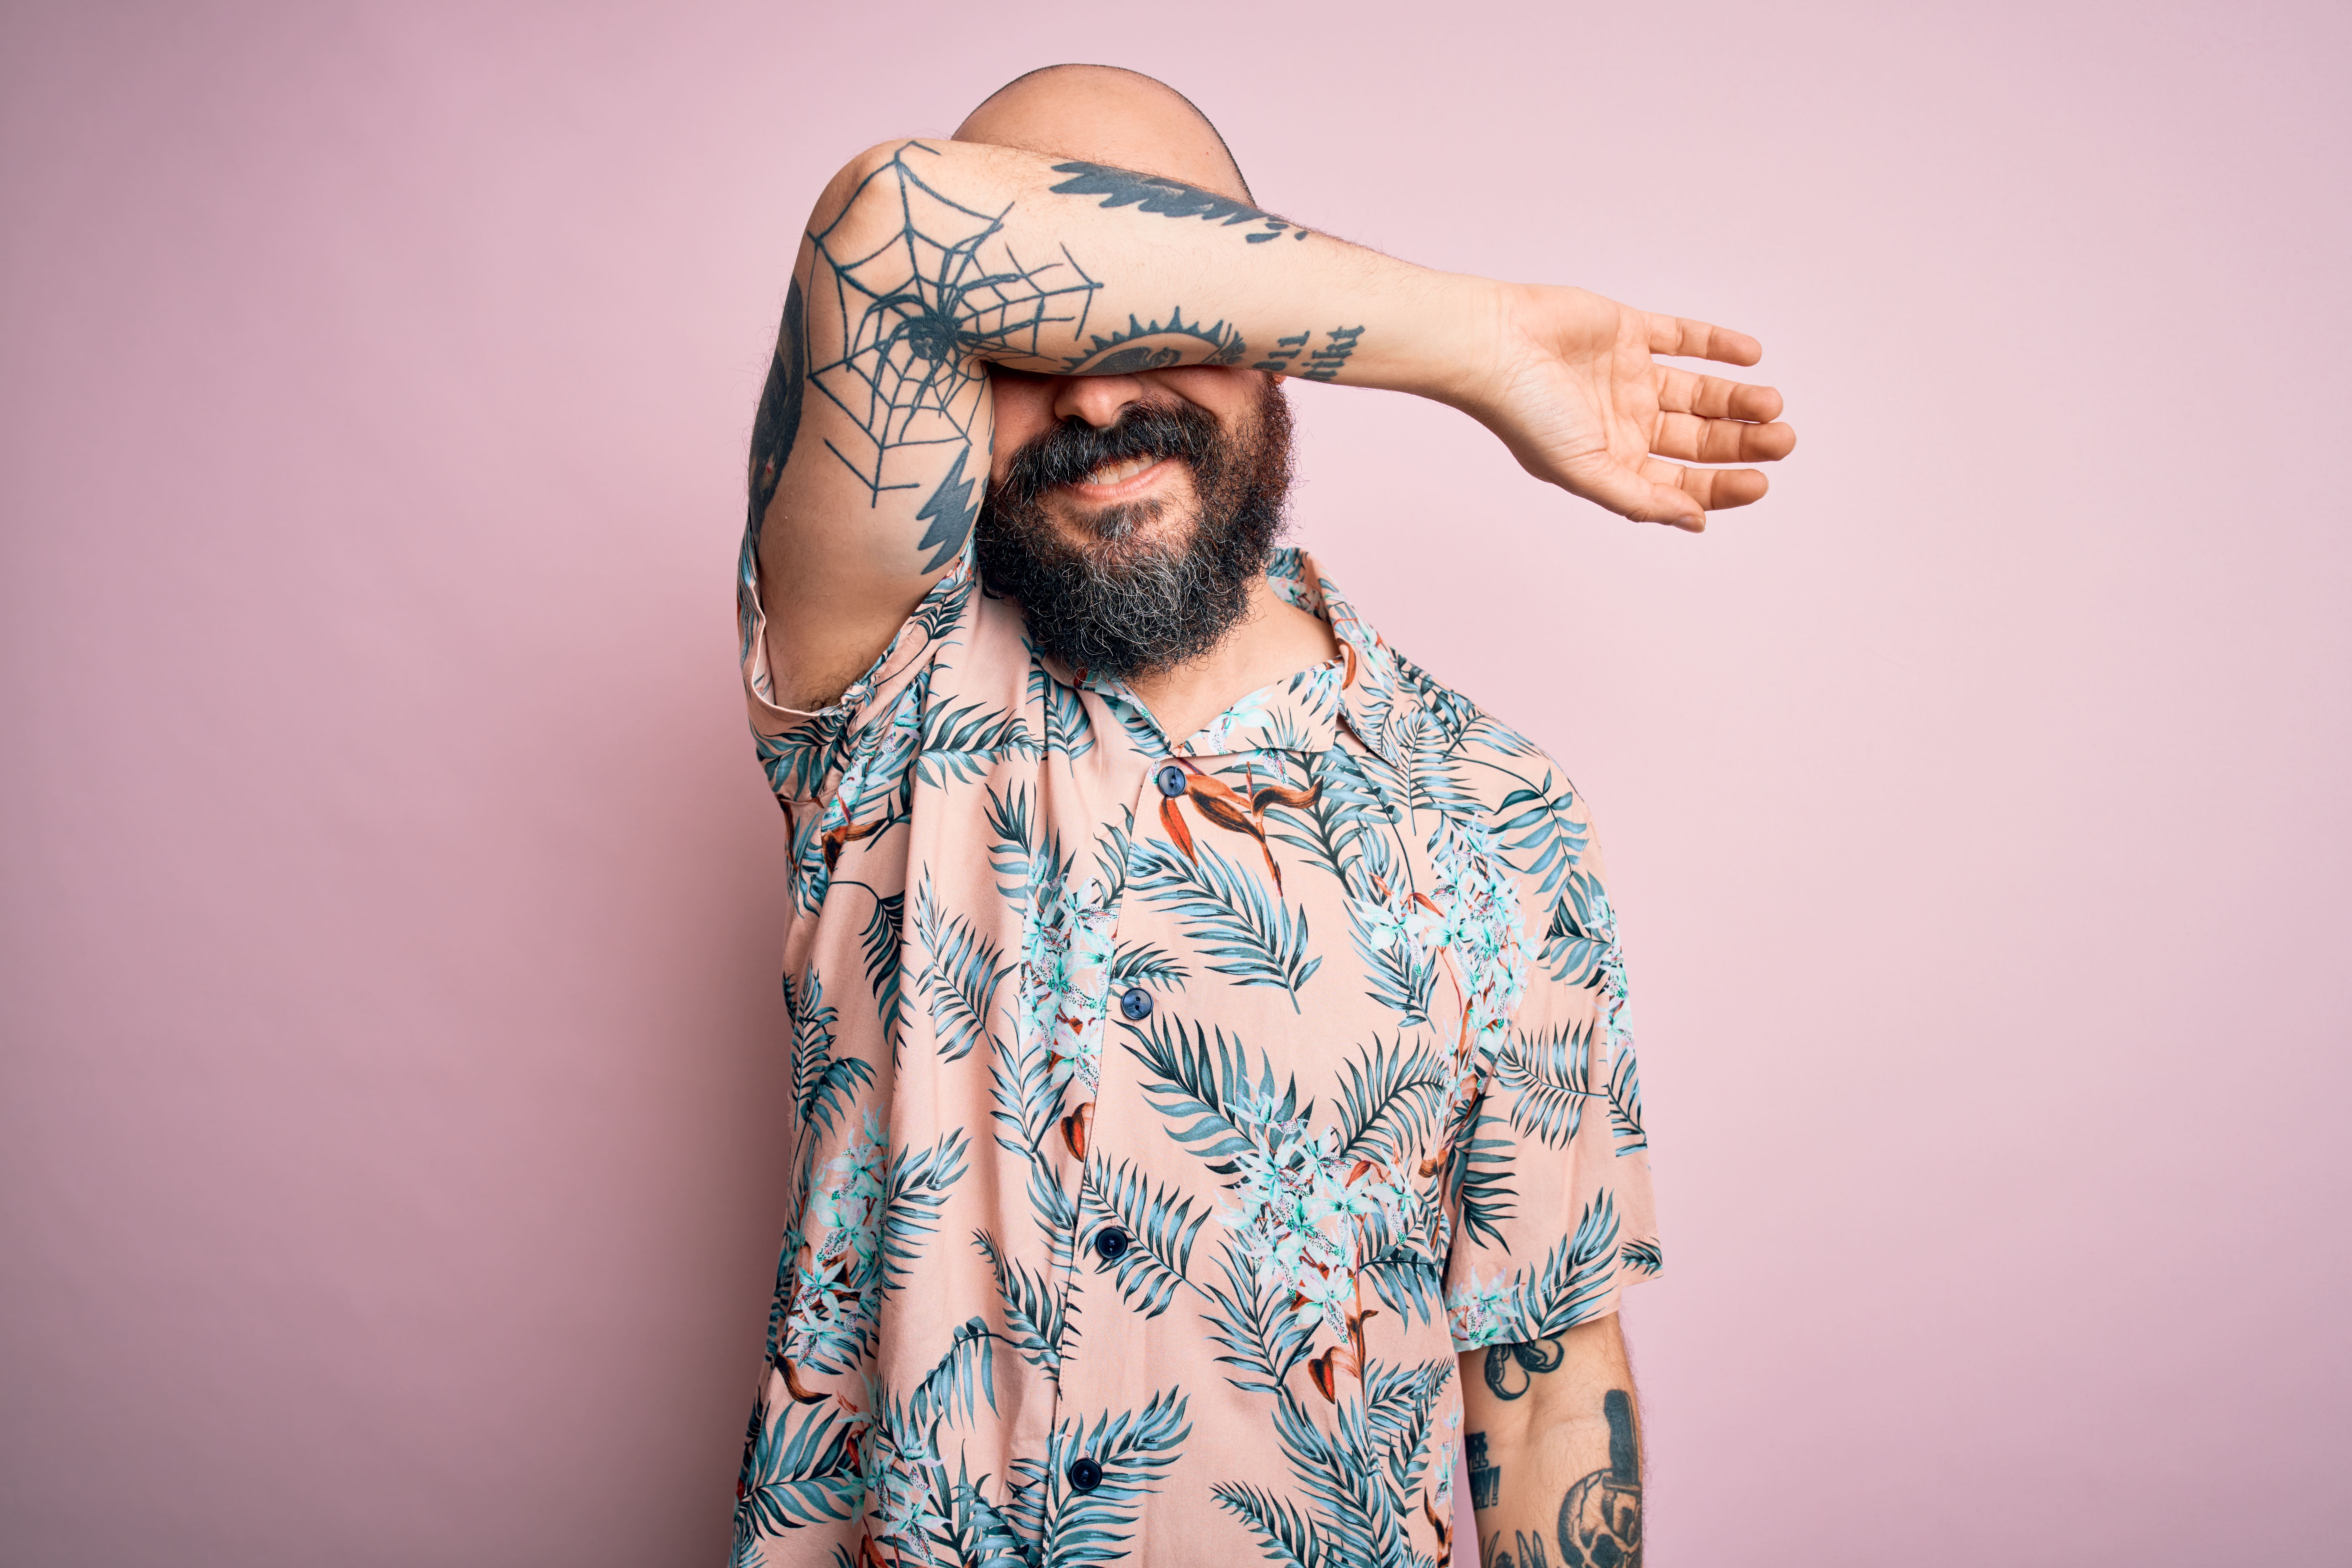 Man with tattooed arm | Shutterstock